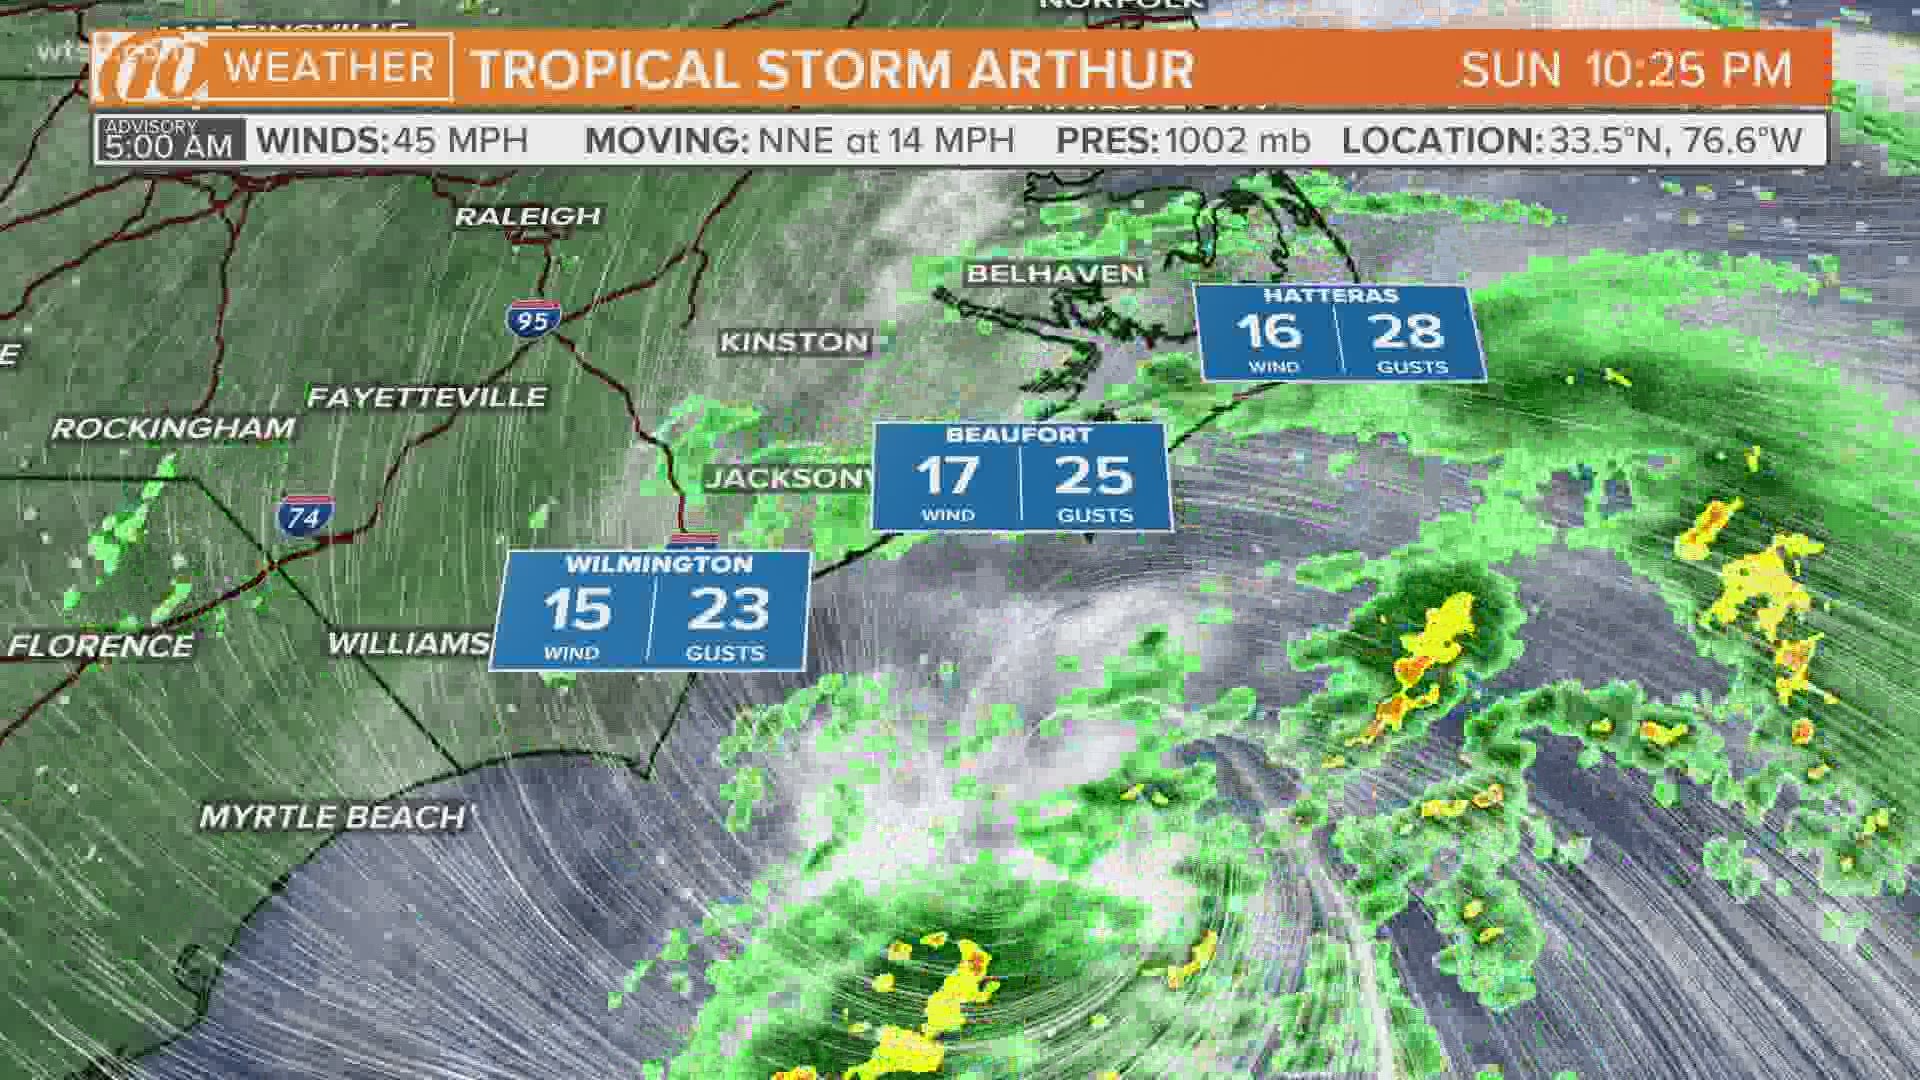 A sliver of the Outer Banks of North Carolina, where a tropical storm warning is in effect, could be affected by Arthur.